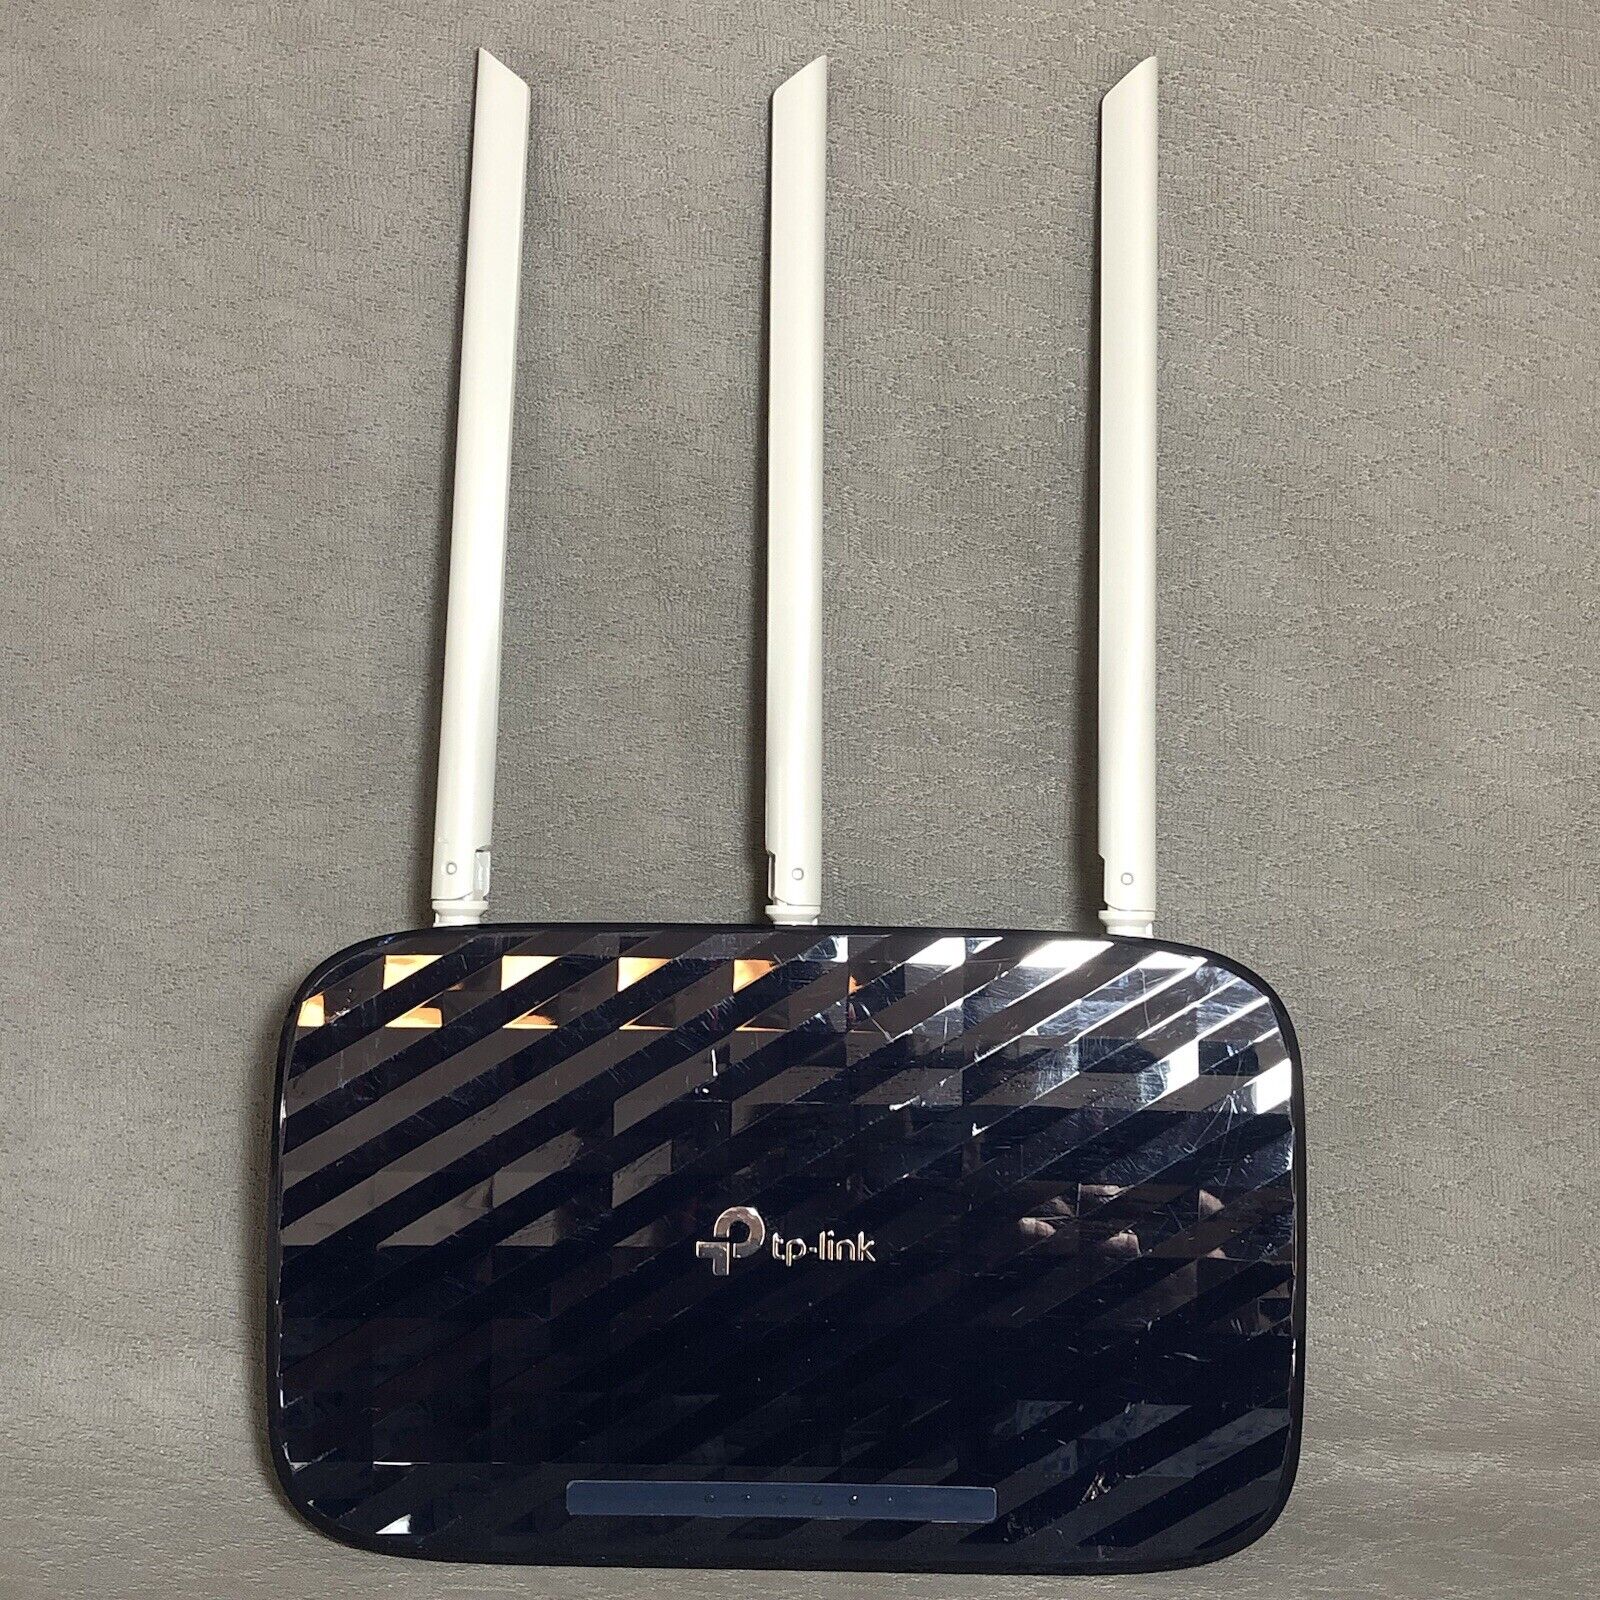 TP-Link Archer C20 Wireless-AC750 Dual Band 4-Port Router 9V Ver. 5.6